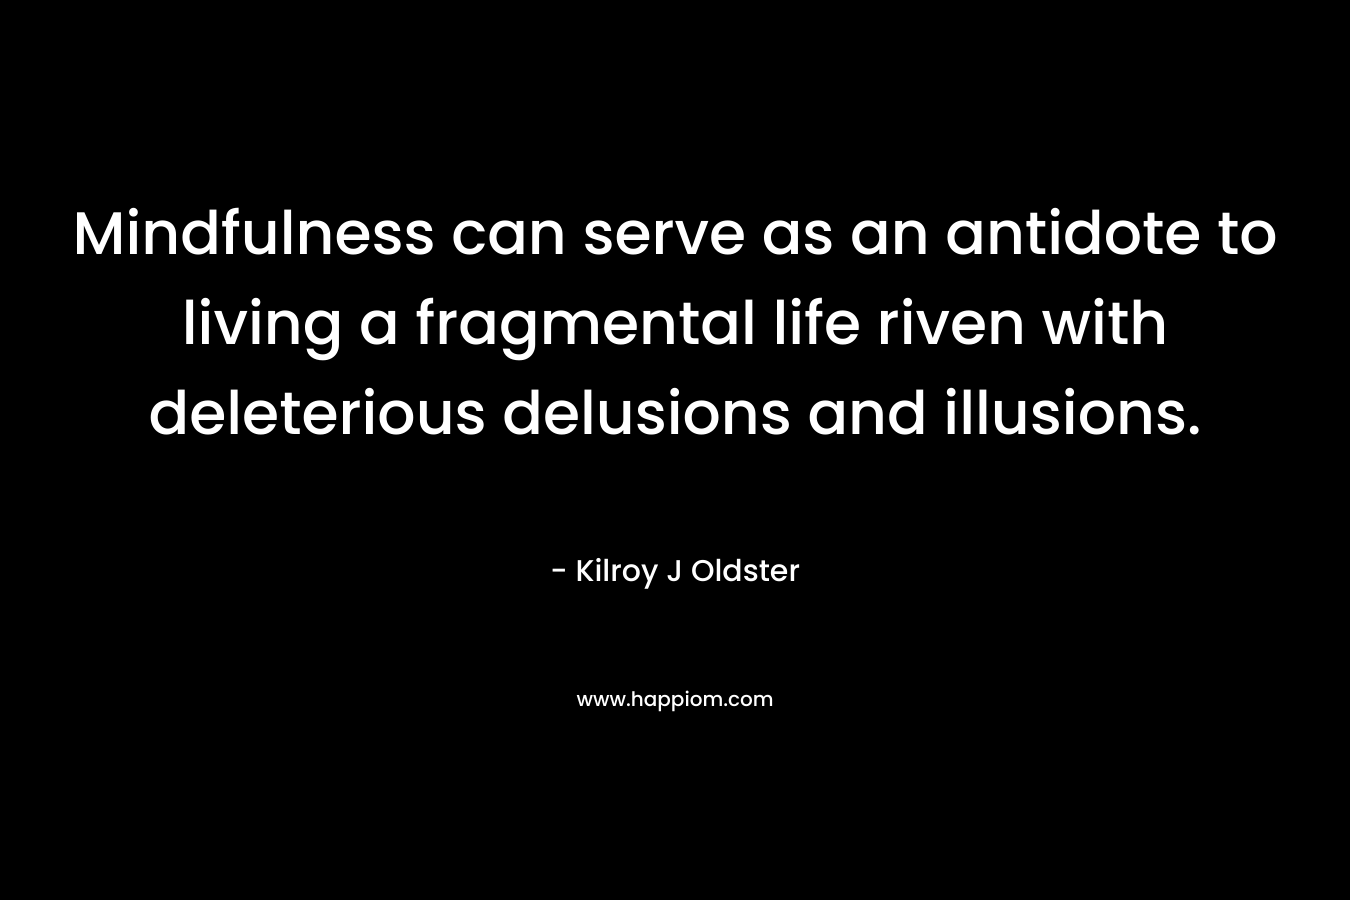 Mindfulness can serve as an antidote to living a fragmental life riven with deleterious delusions and illusions. – Kilroy J Oldster